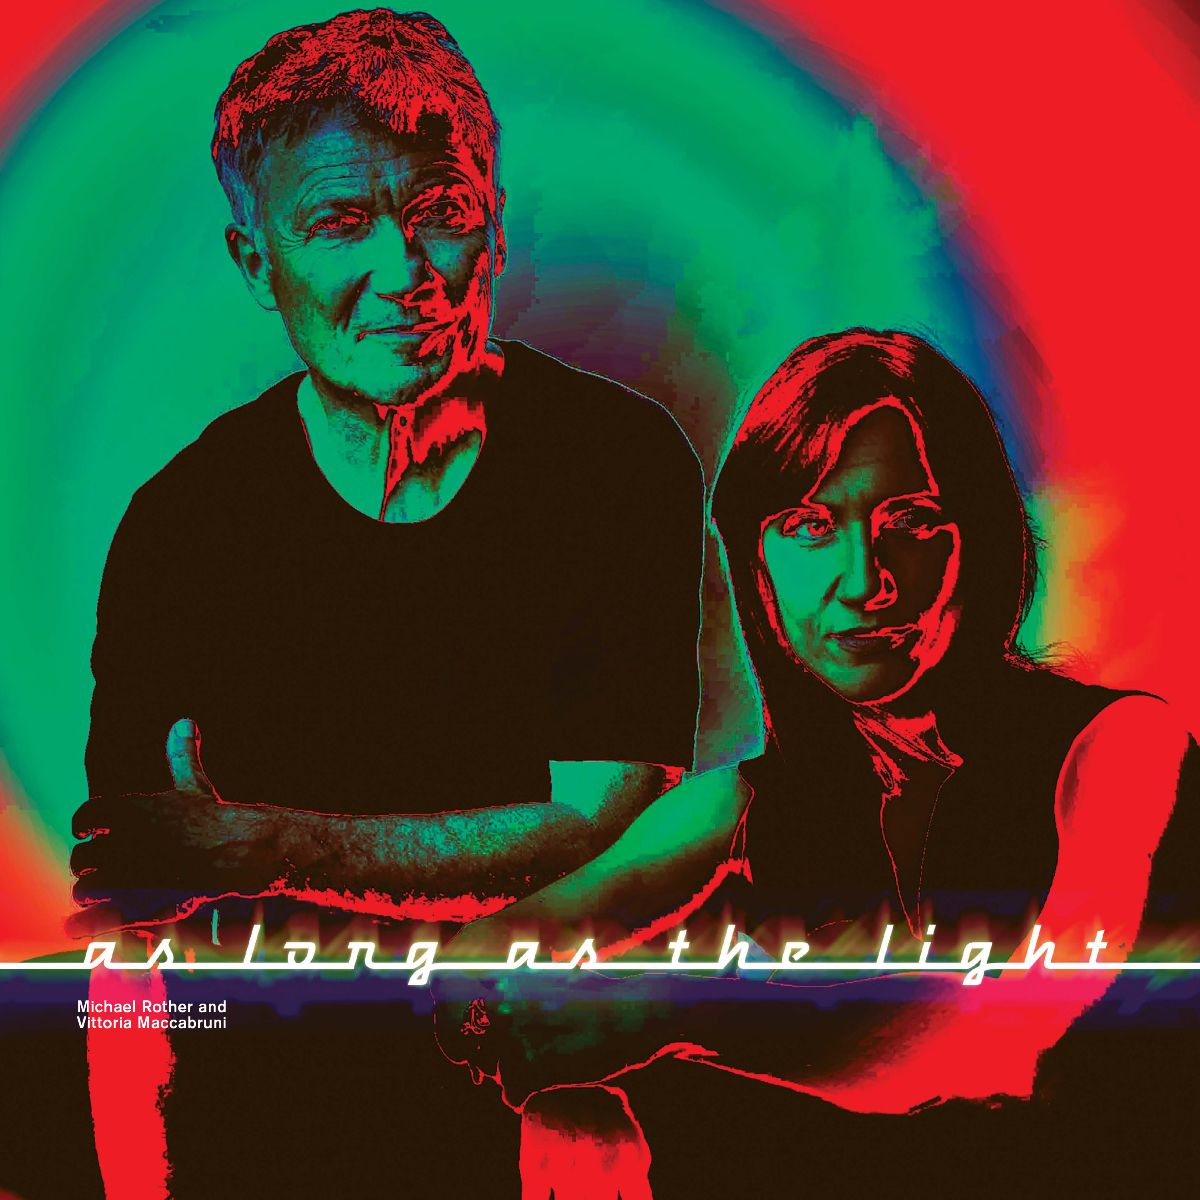  MICHAEL ROTHER & VITTORIA MACCABRUNI "As Long As The Light"